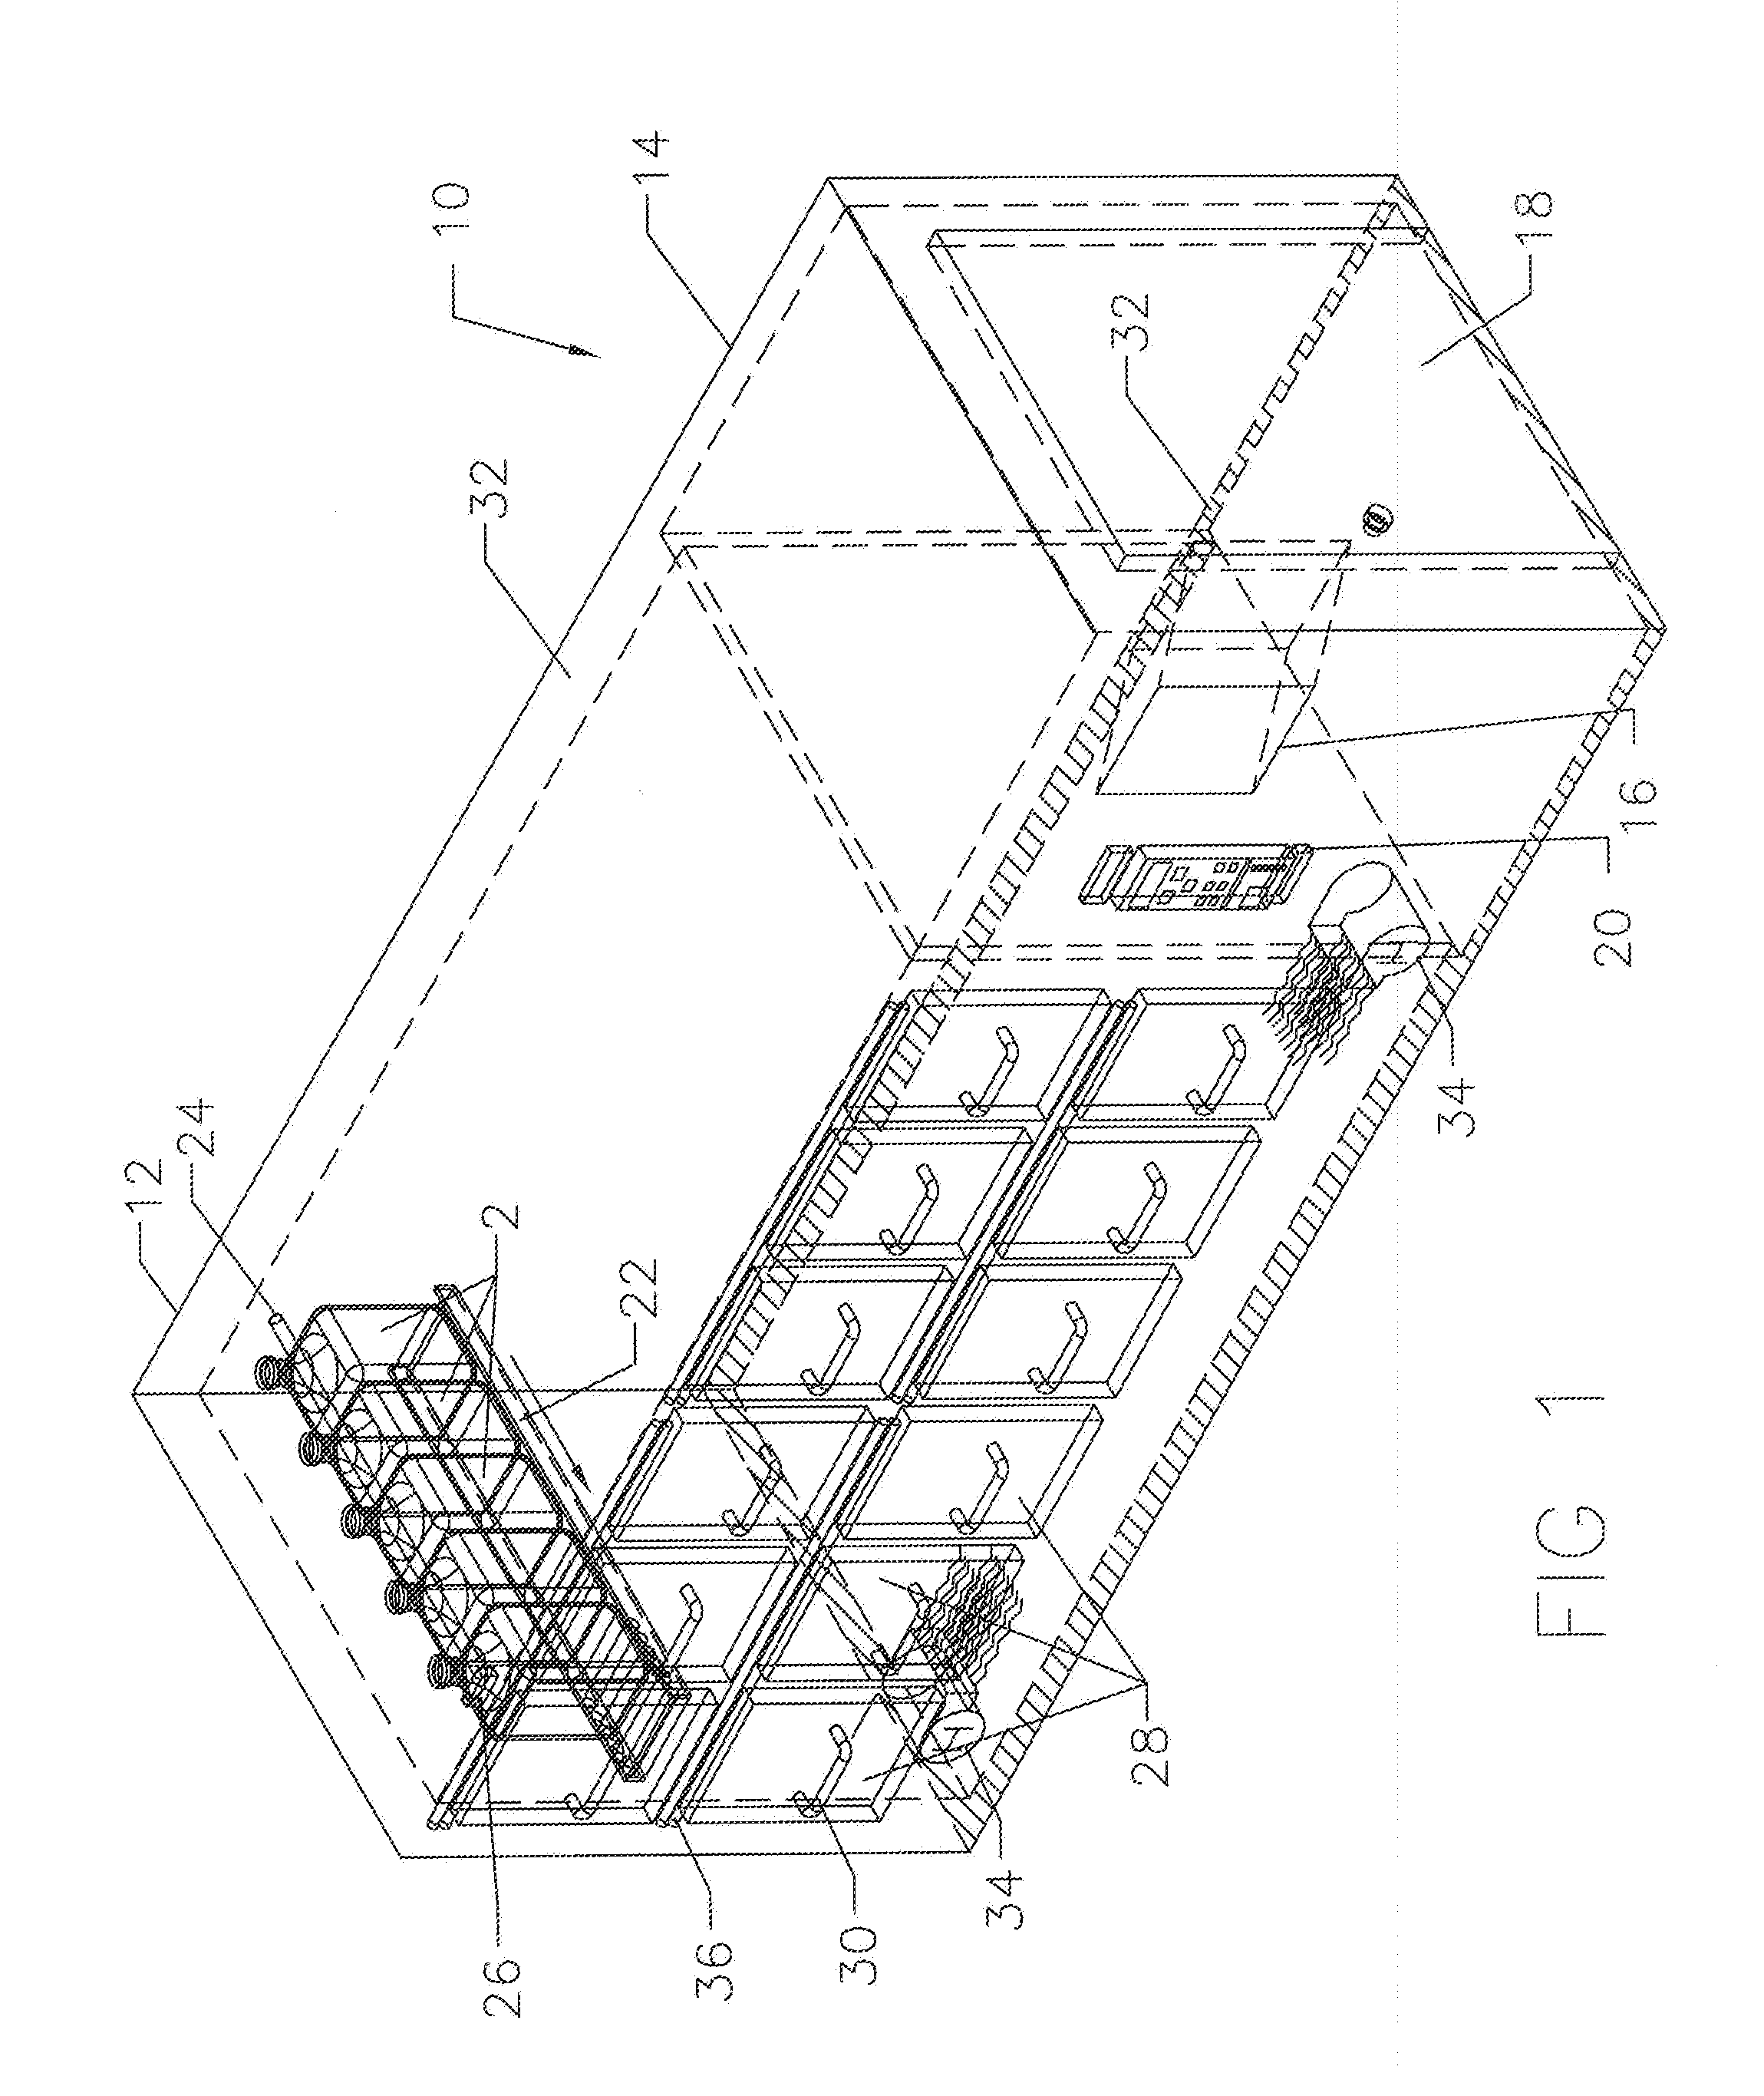 Large bottle vending apparatus and method